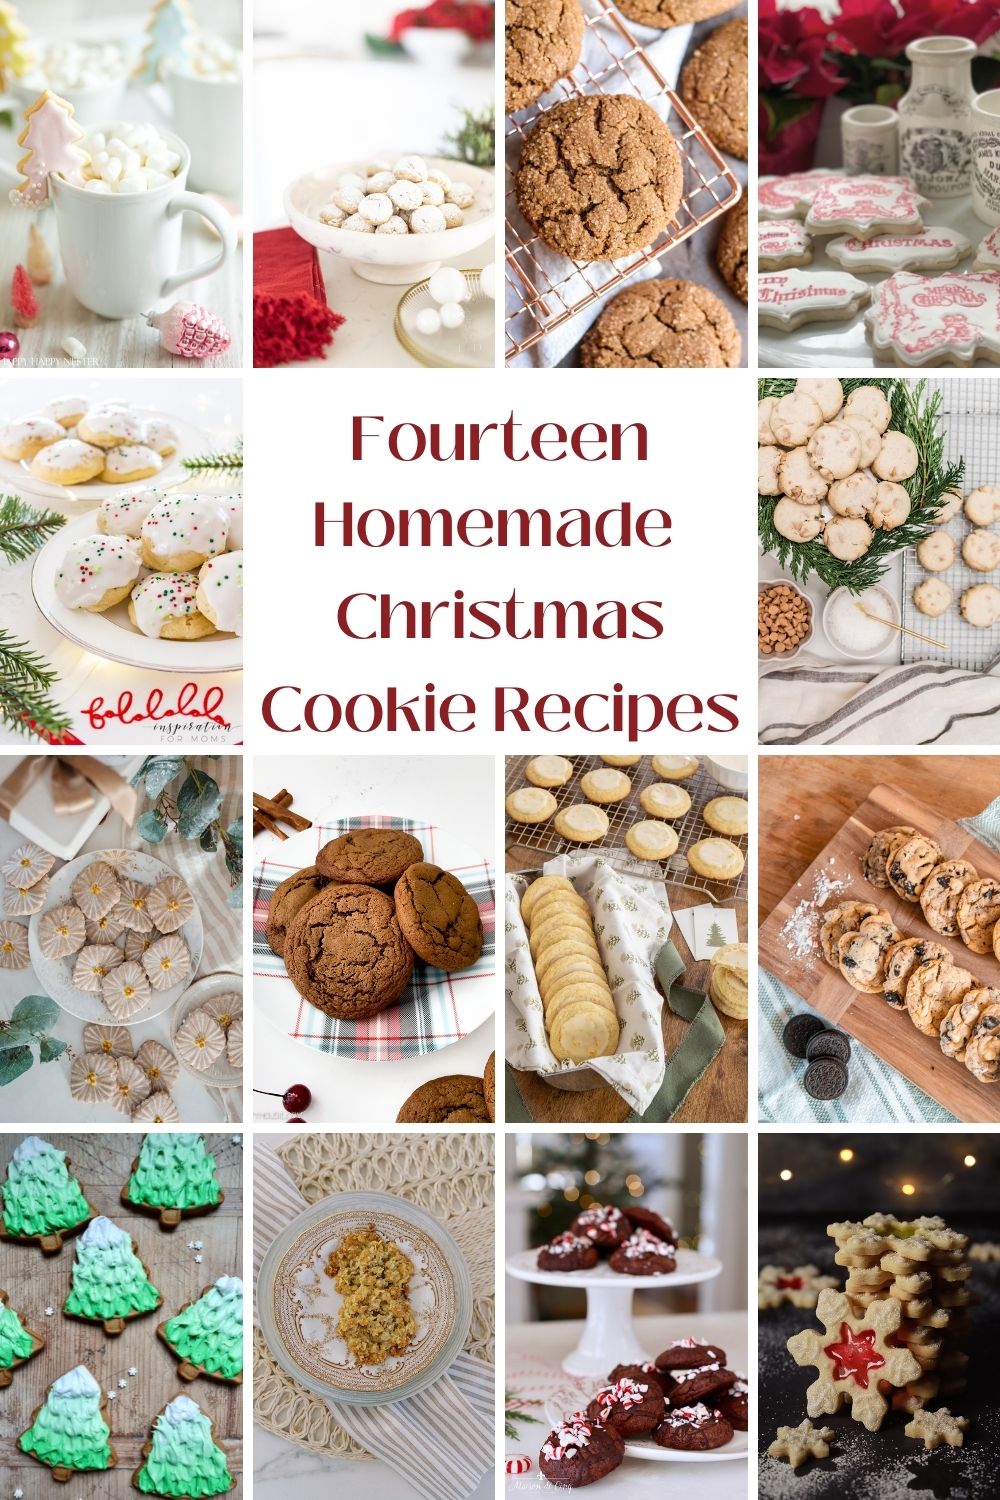 a collage image of 12 different Christmas cookie recipe ideas